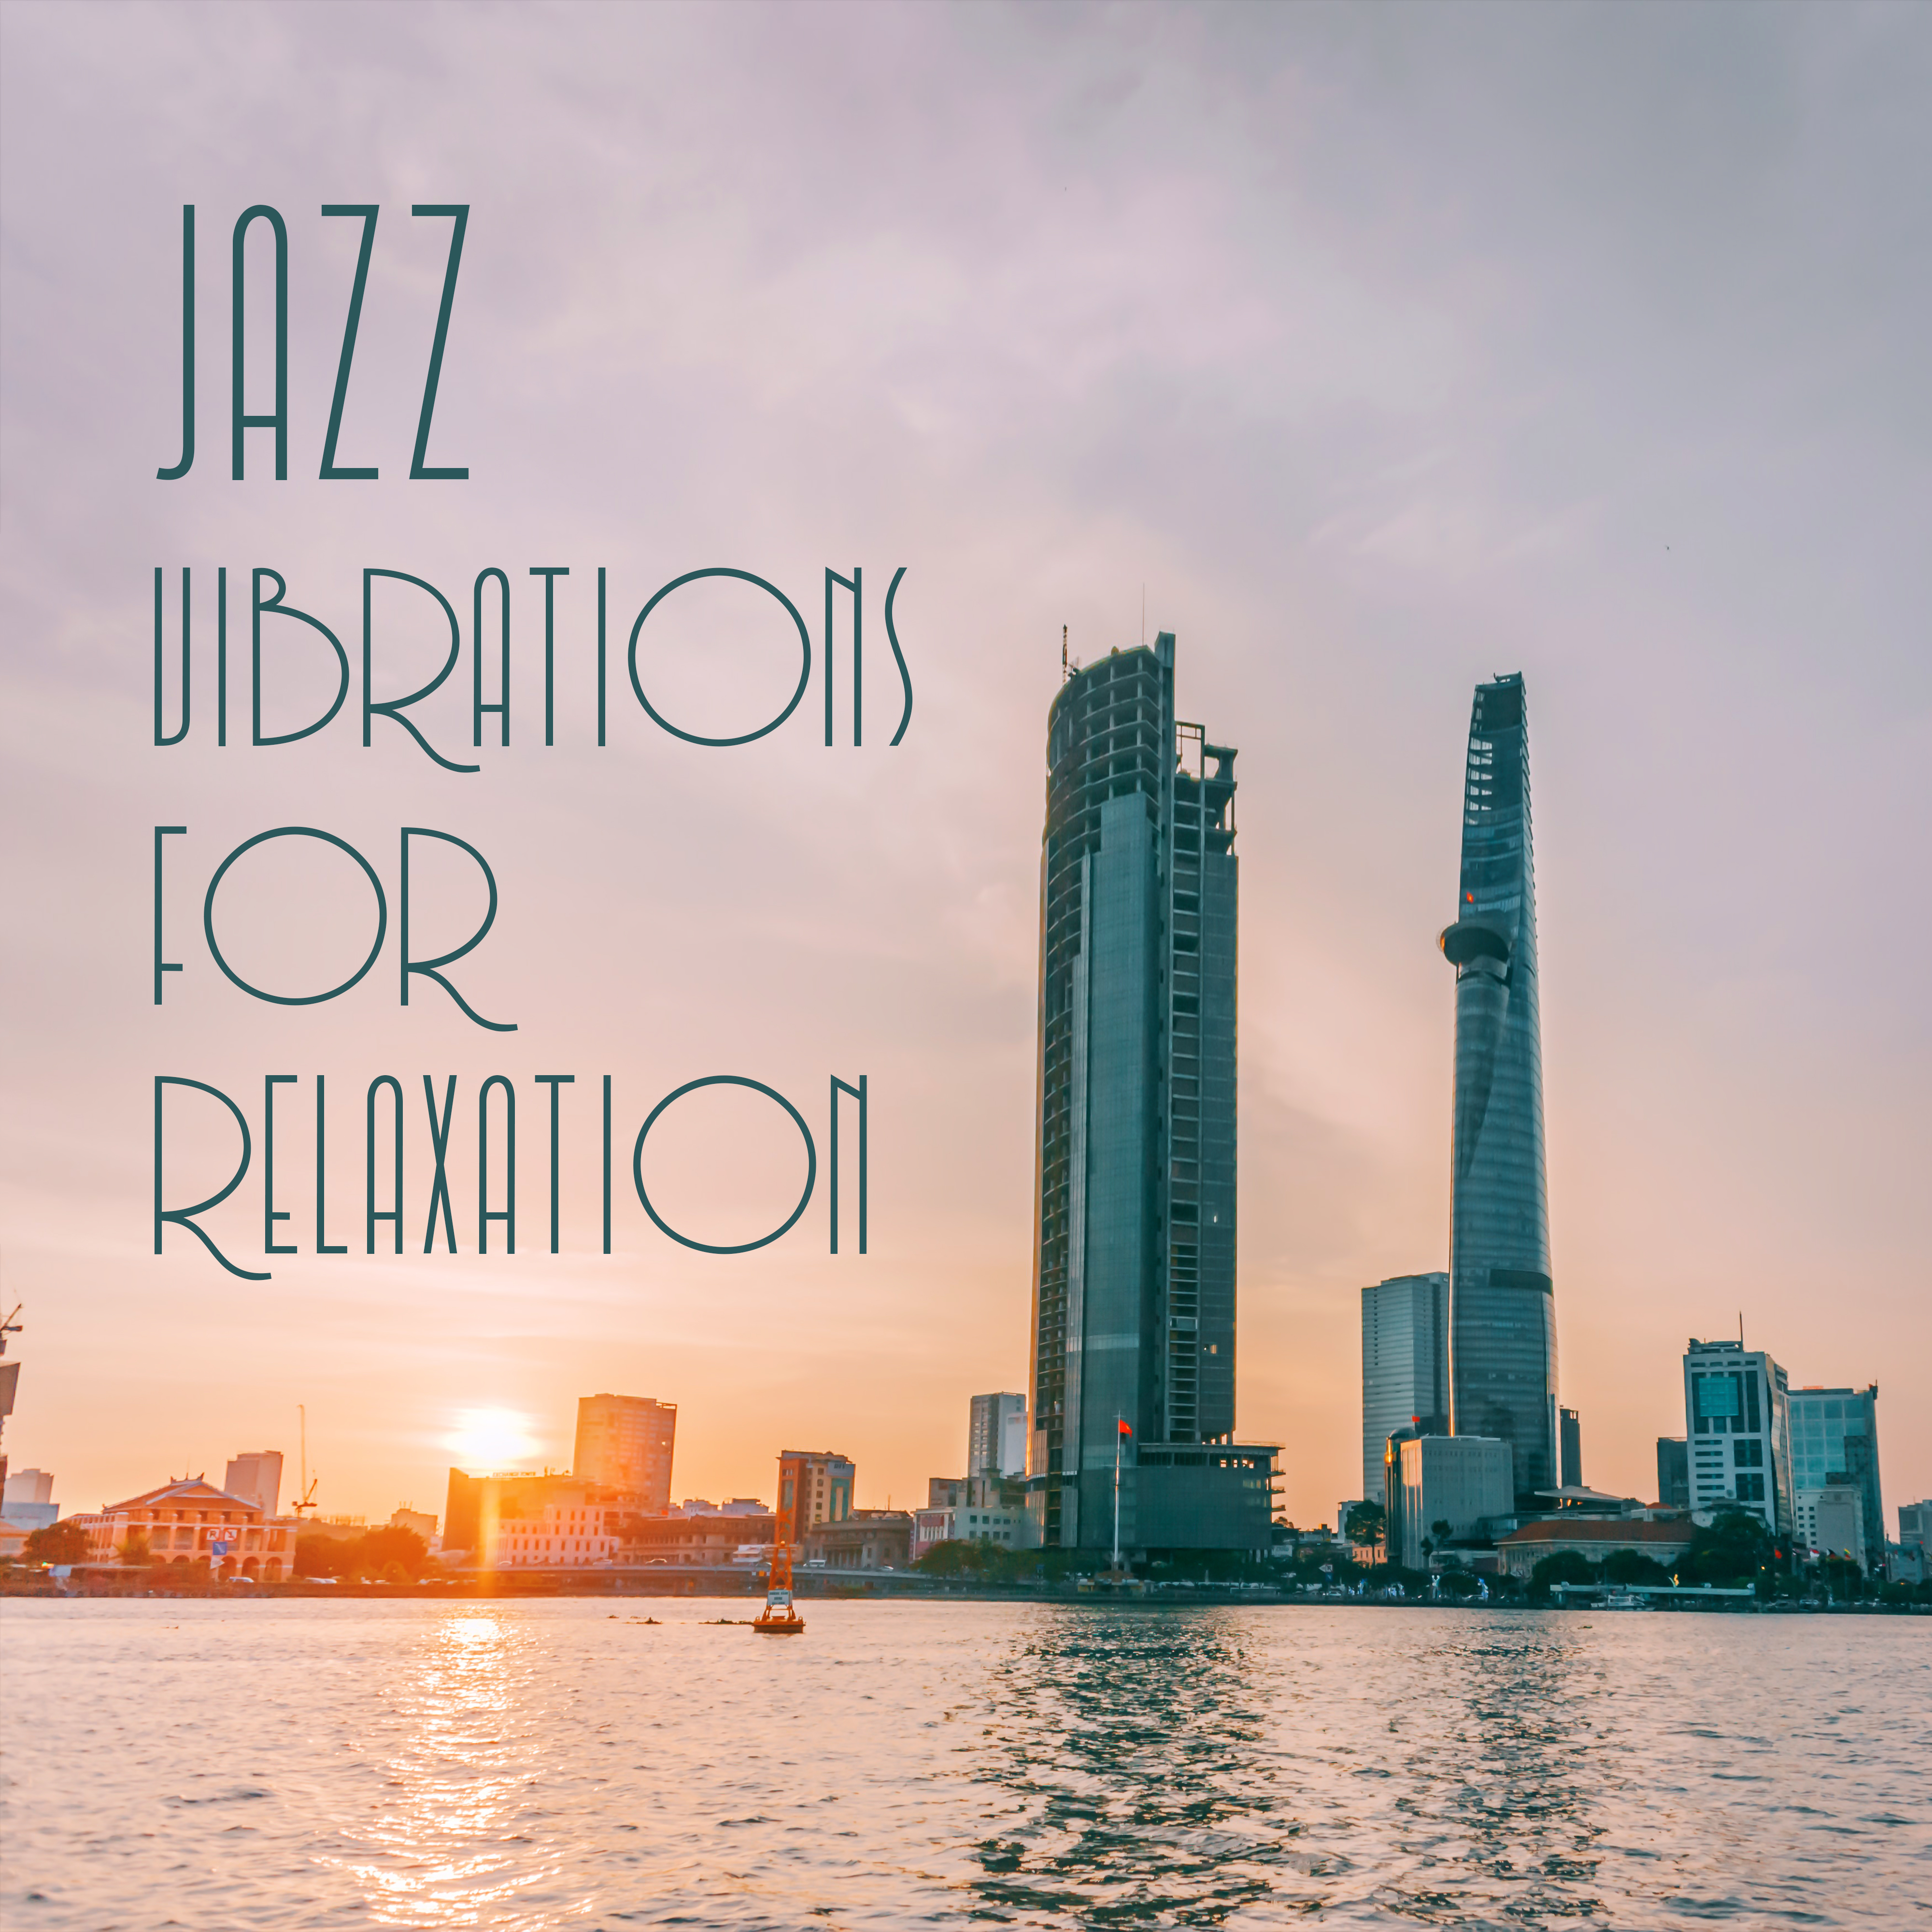 Jazz Vibrations for Relaxation